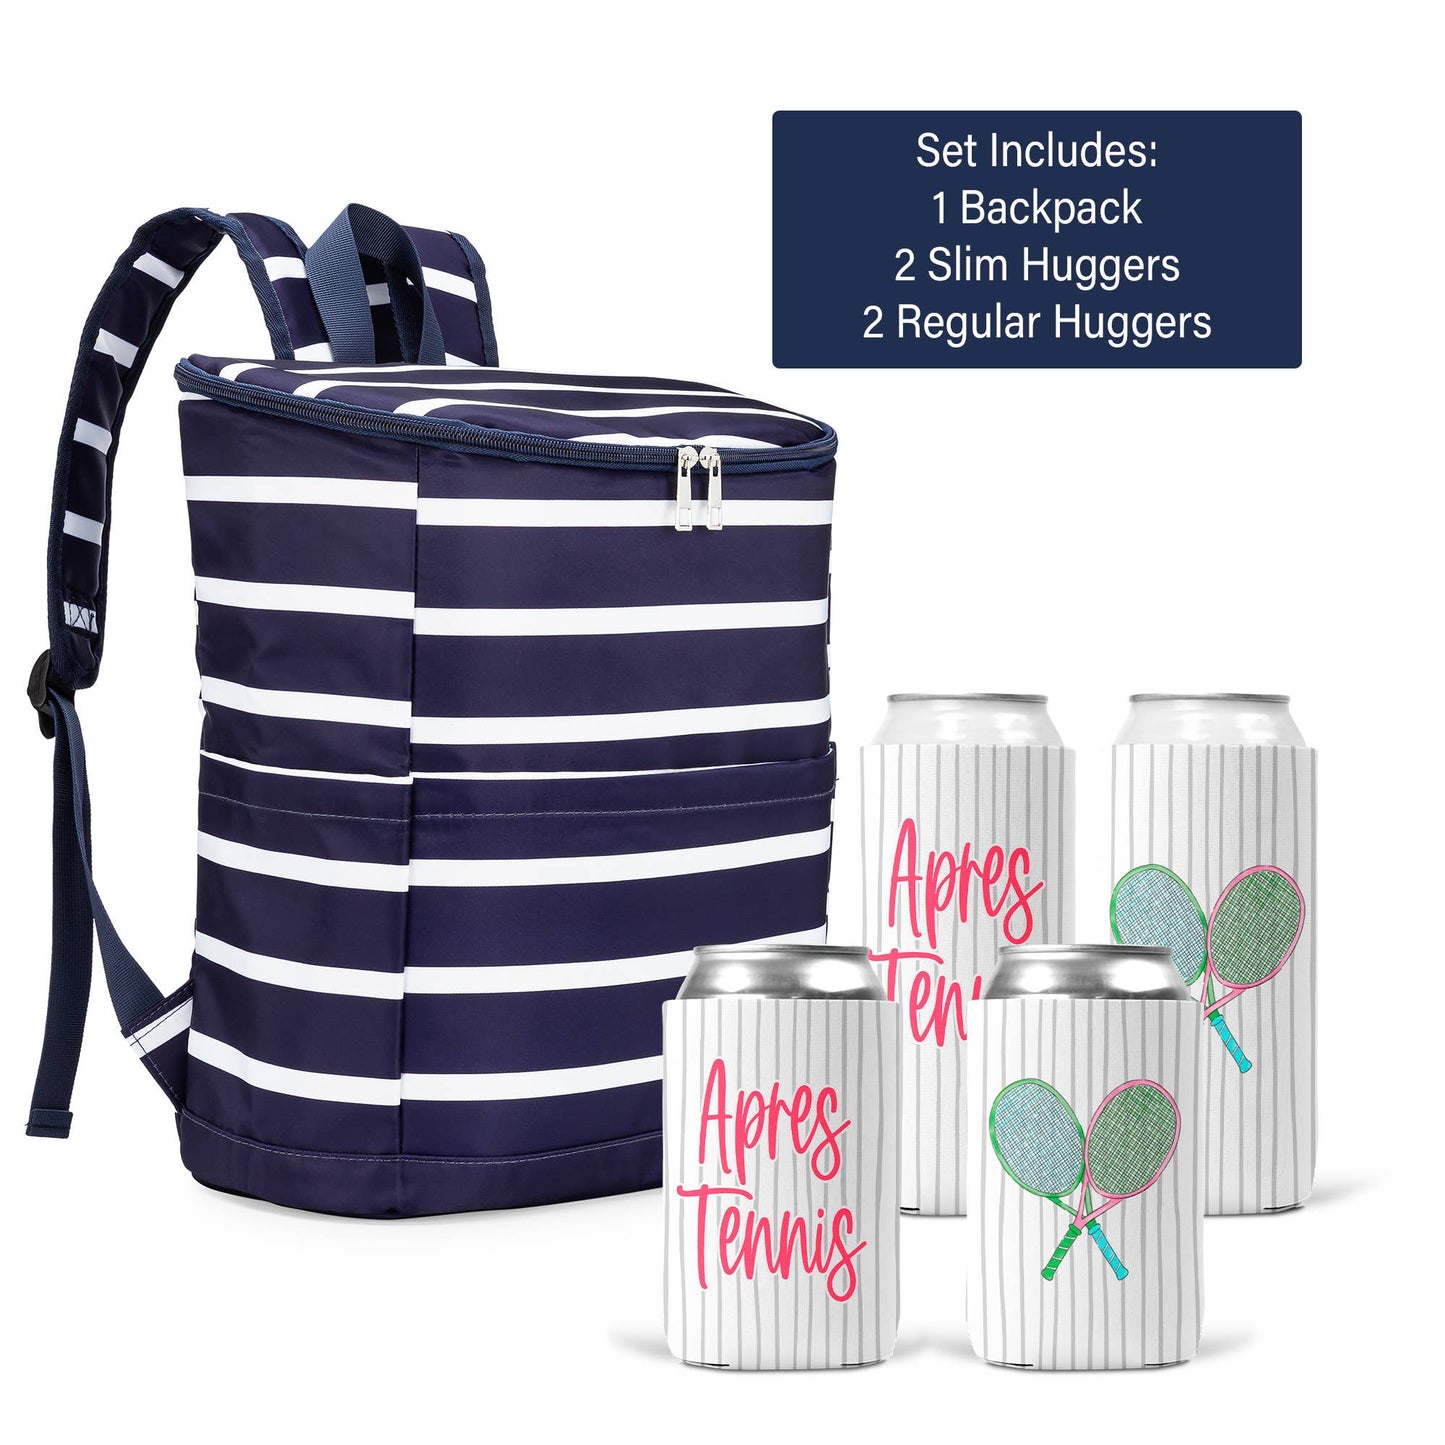 The Navy Knot - Cooler Backpack and 4 APRES TENNIS Stripes Huggers-Gift Set